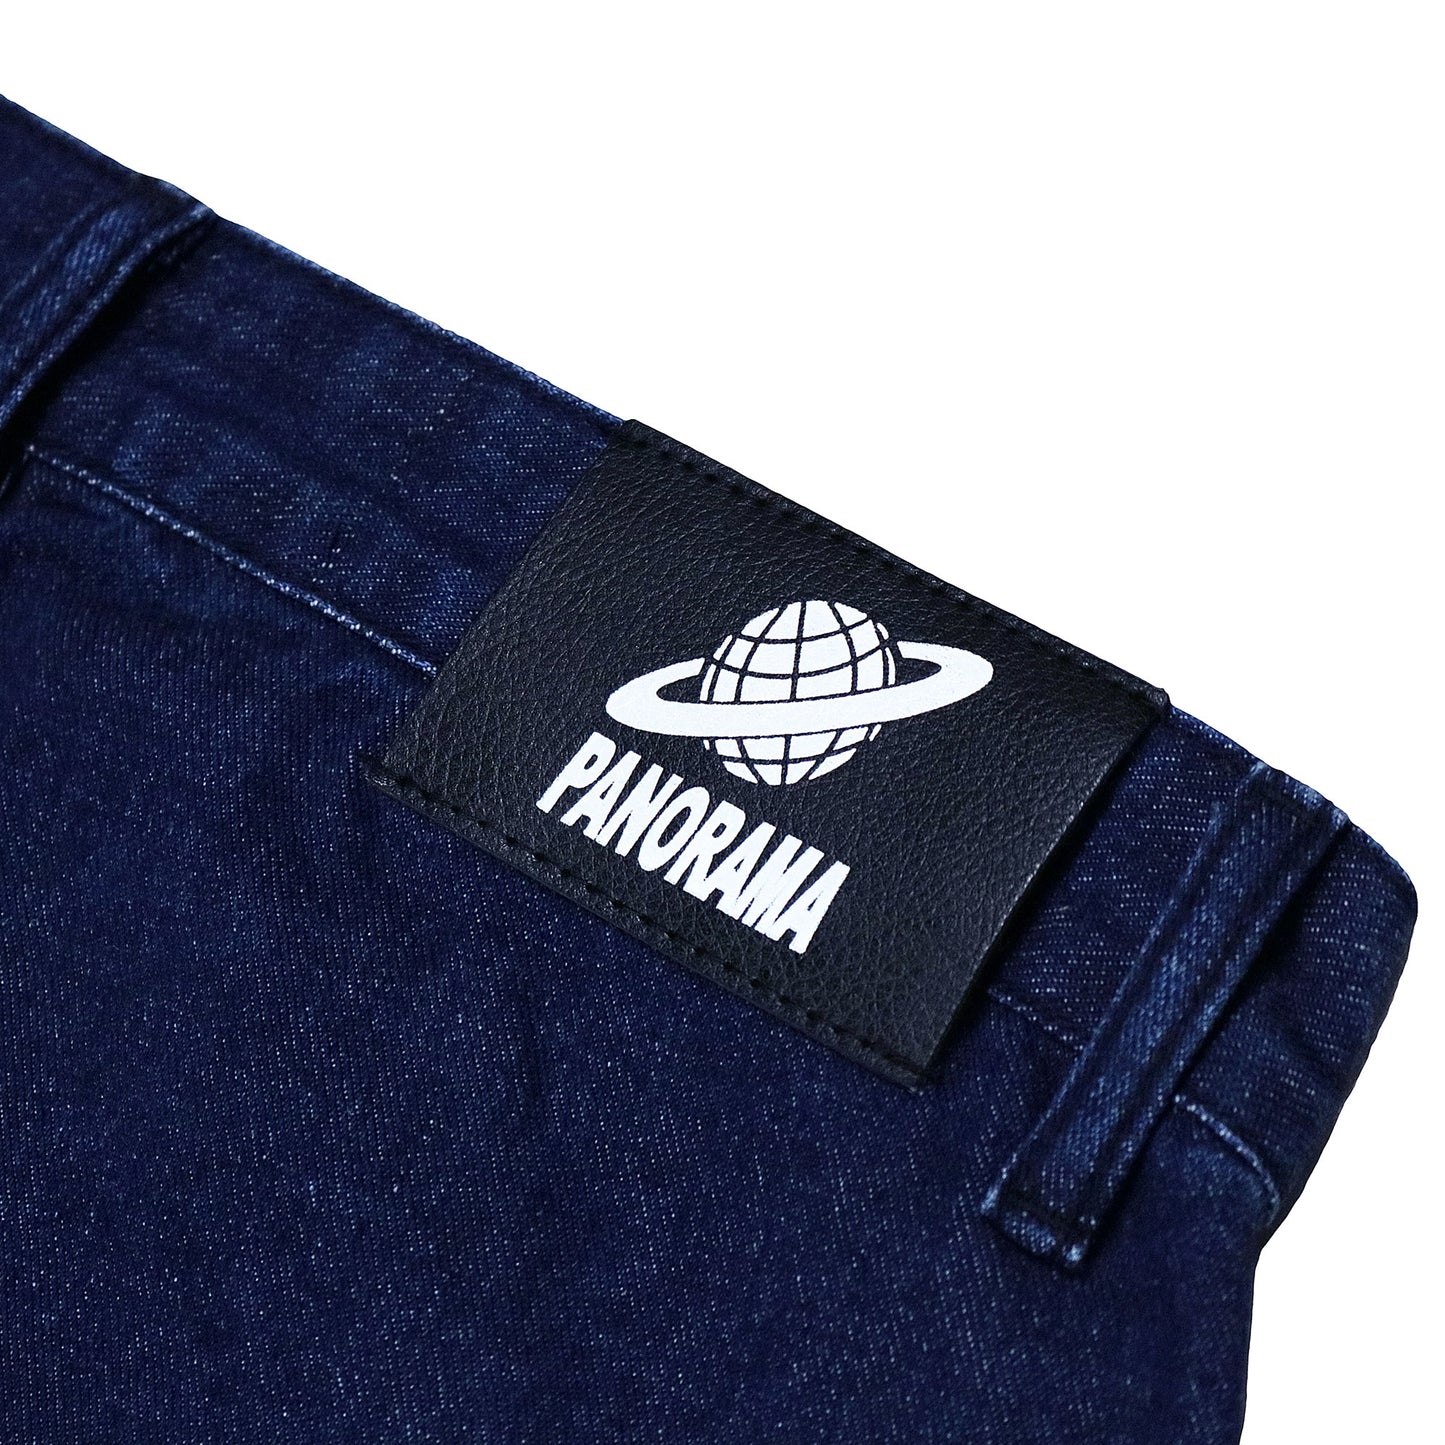 Panorama Blue Jeans